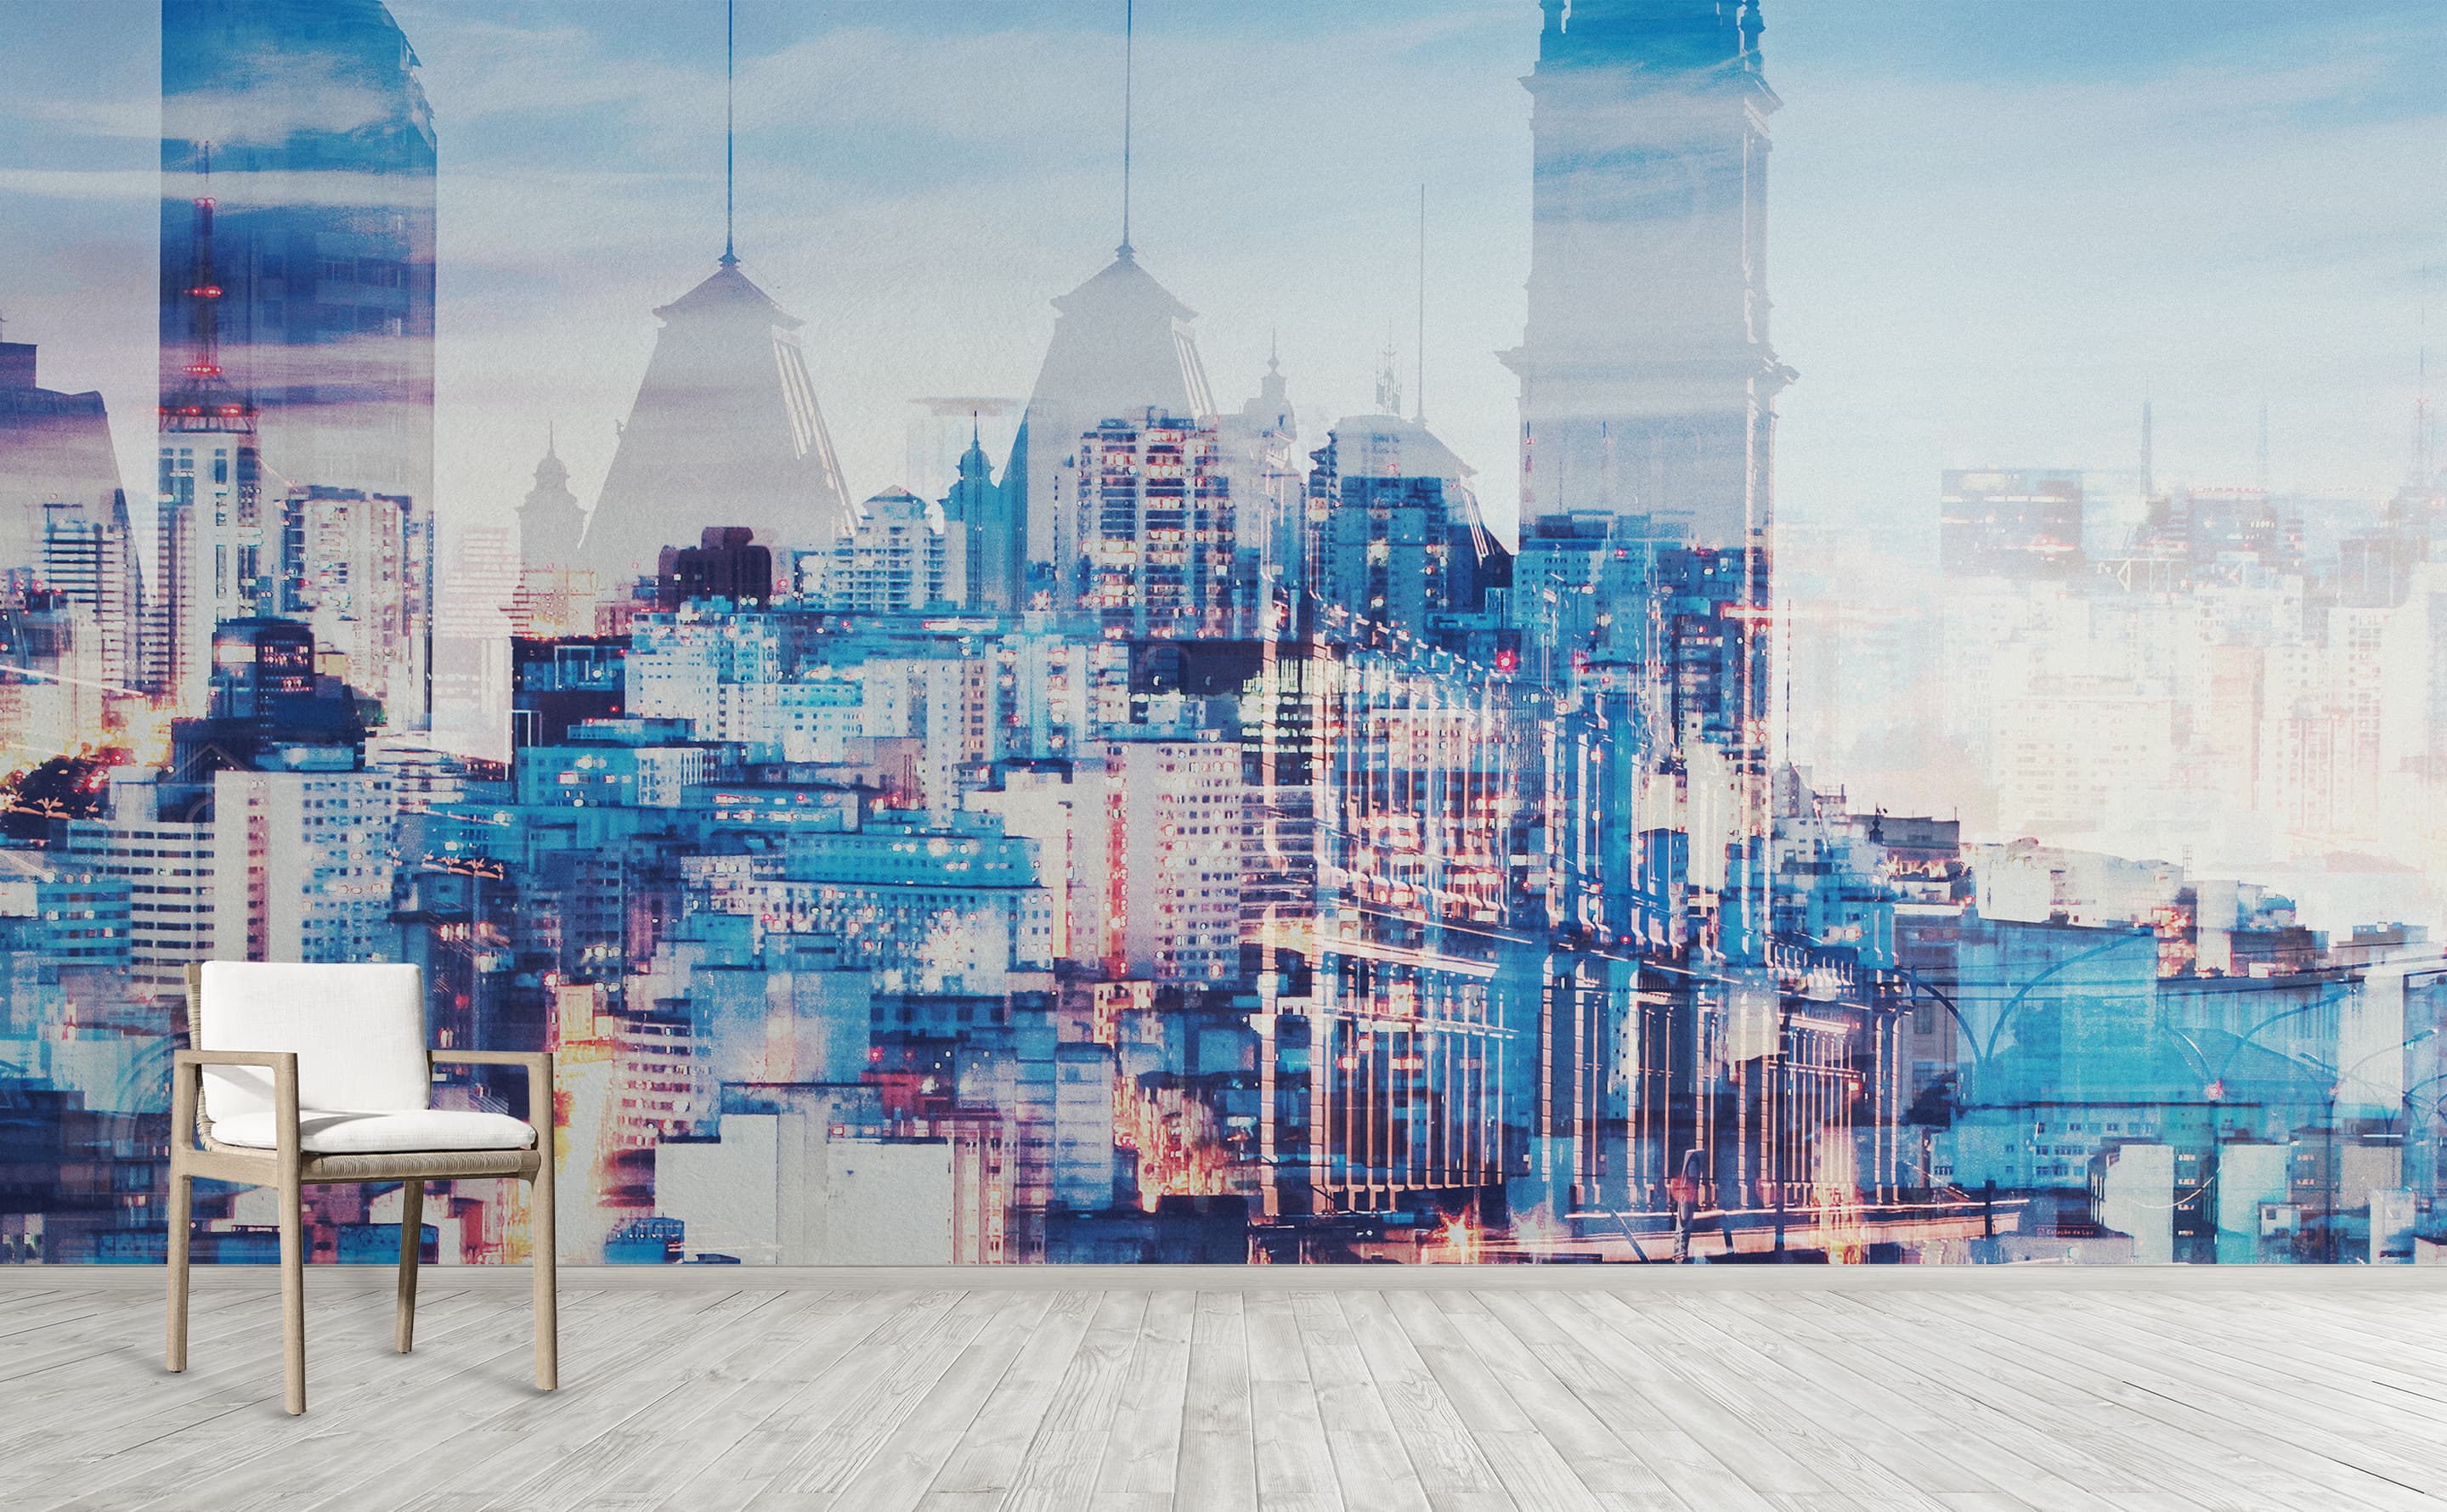 SP Wall Mural by Walls Need Loveﾮ